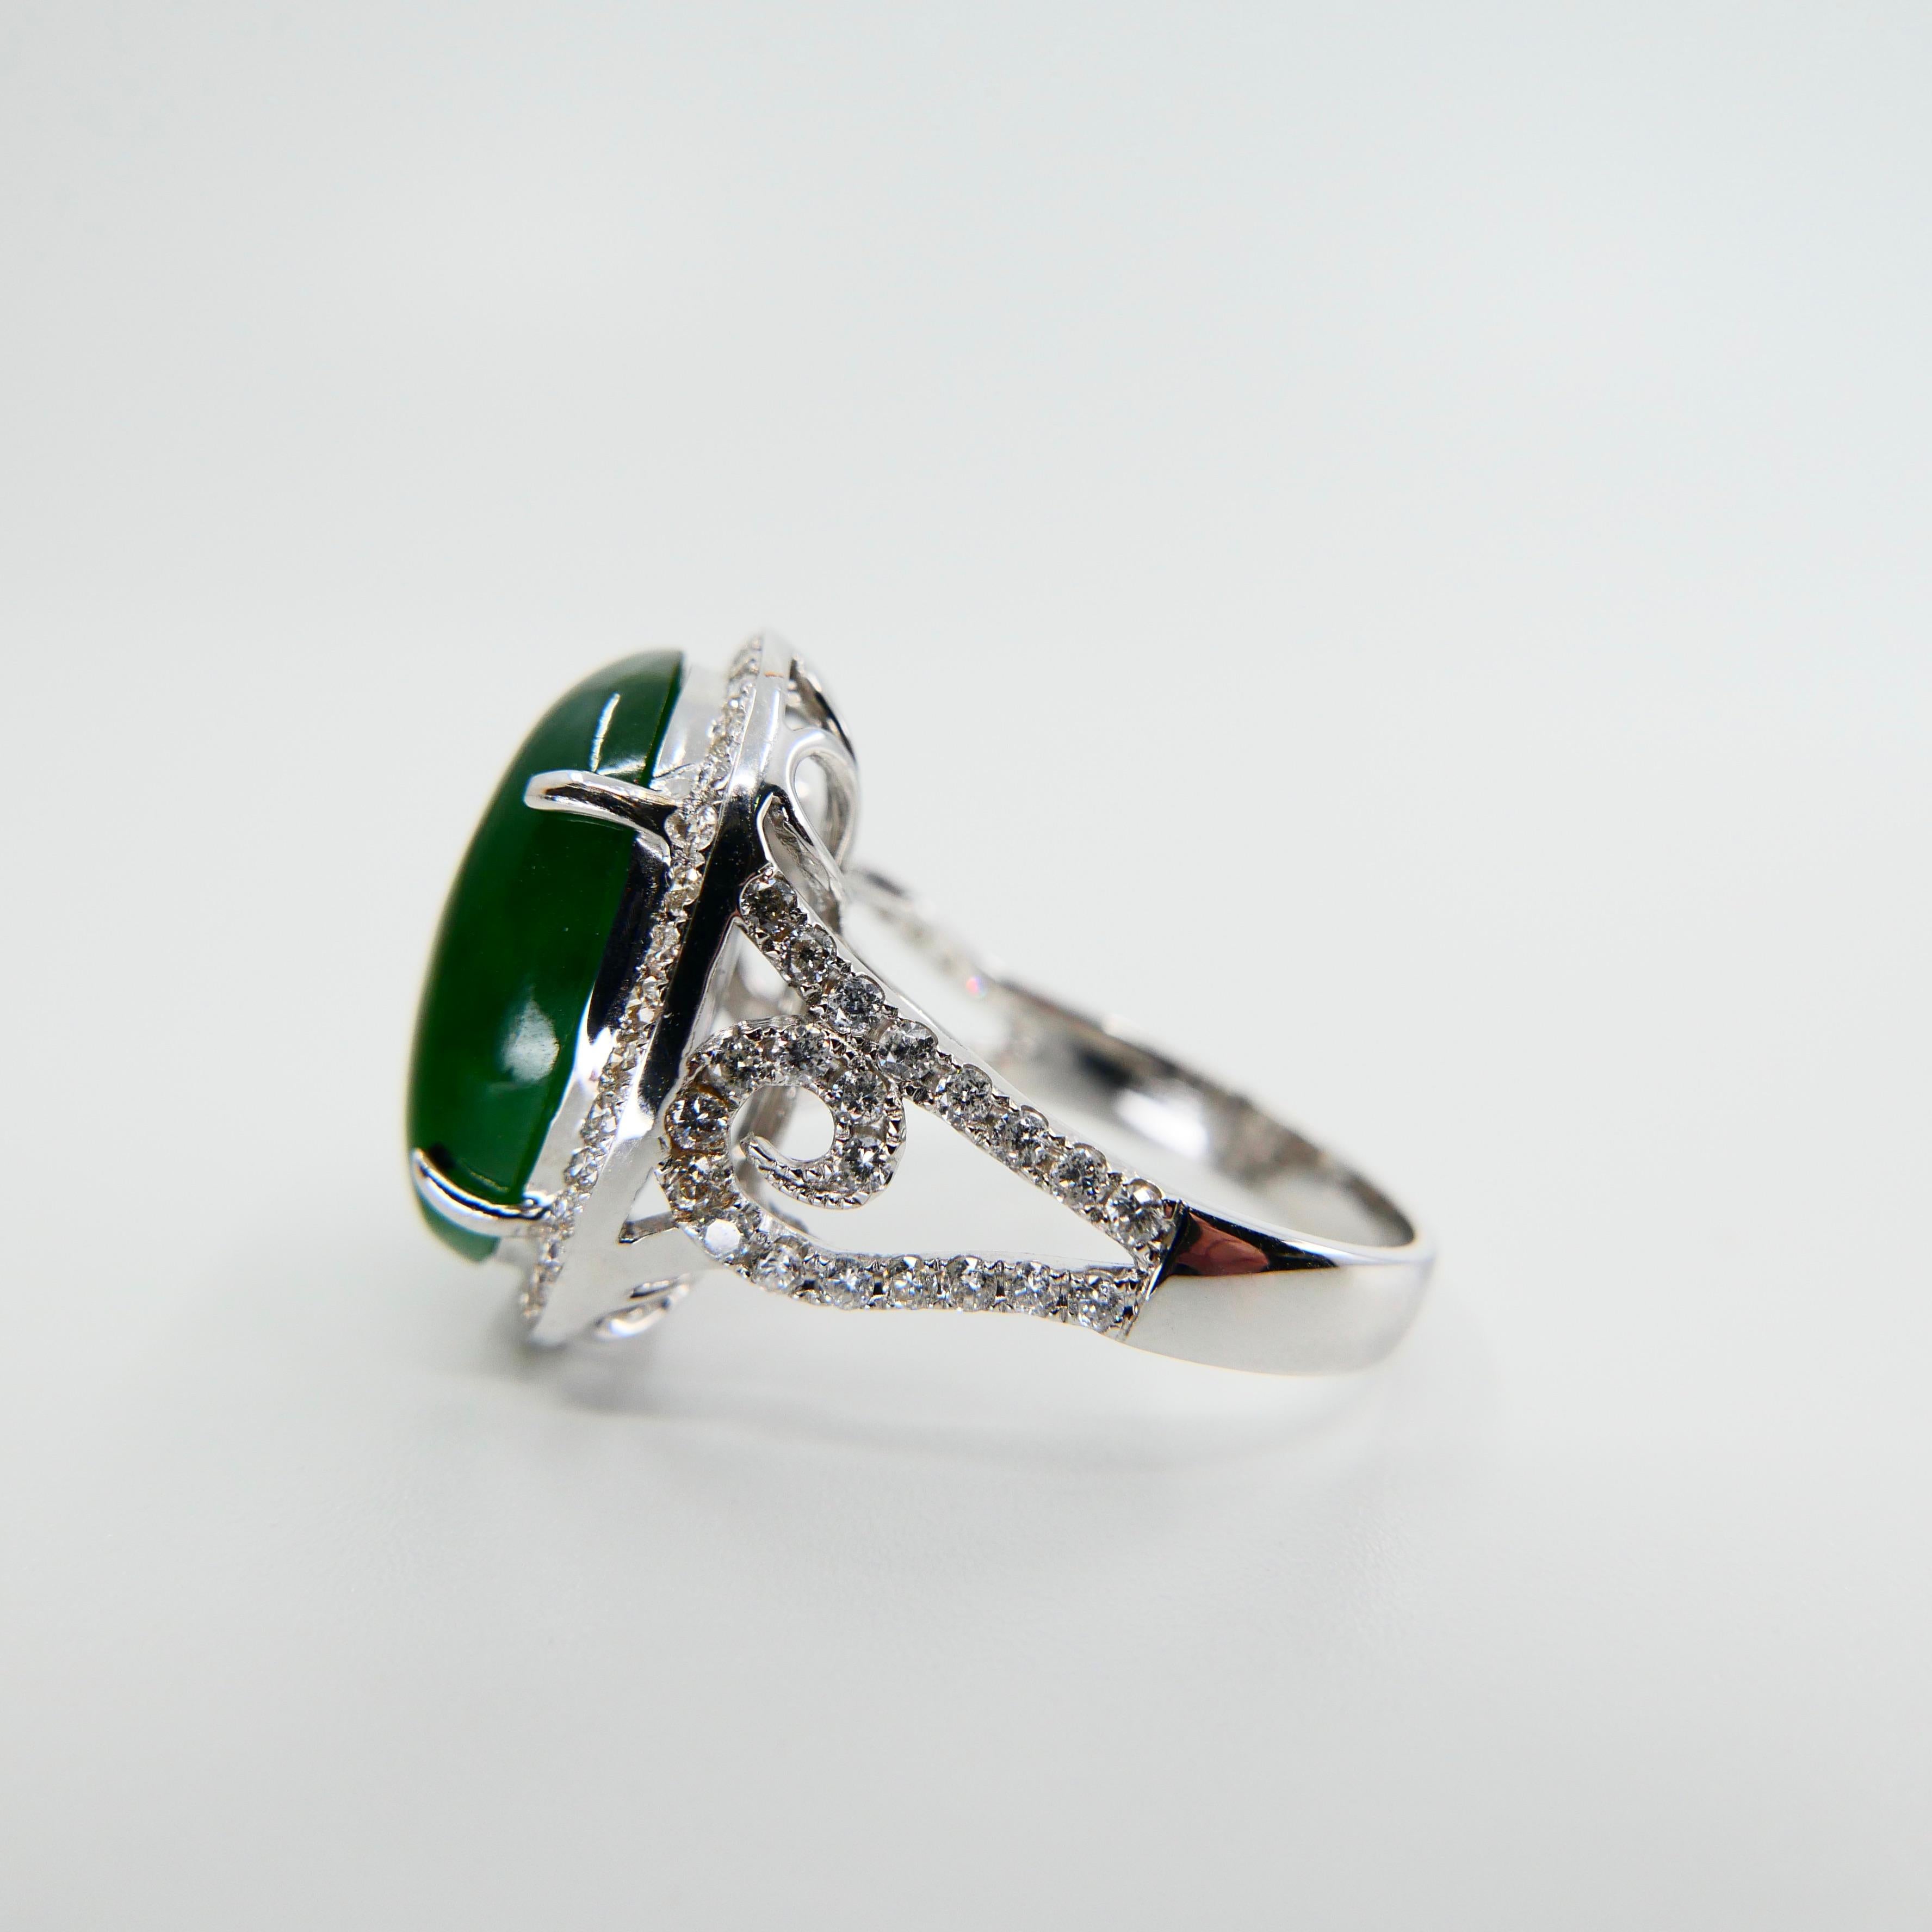 Certified Type A Jadeite Jade & Diamond Cocktail Ring, Intense Green Subtle Glow In Good Condition For Sale In Hong Kong, HK